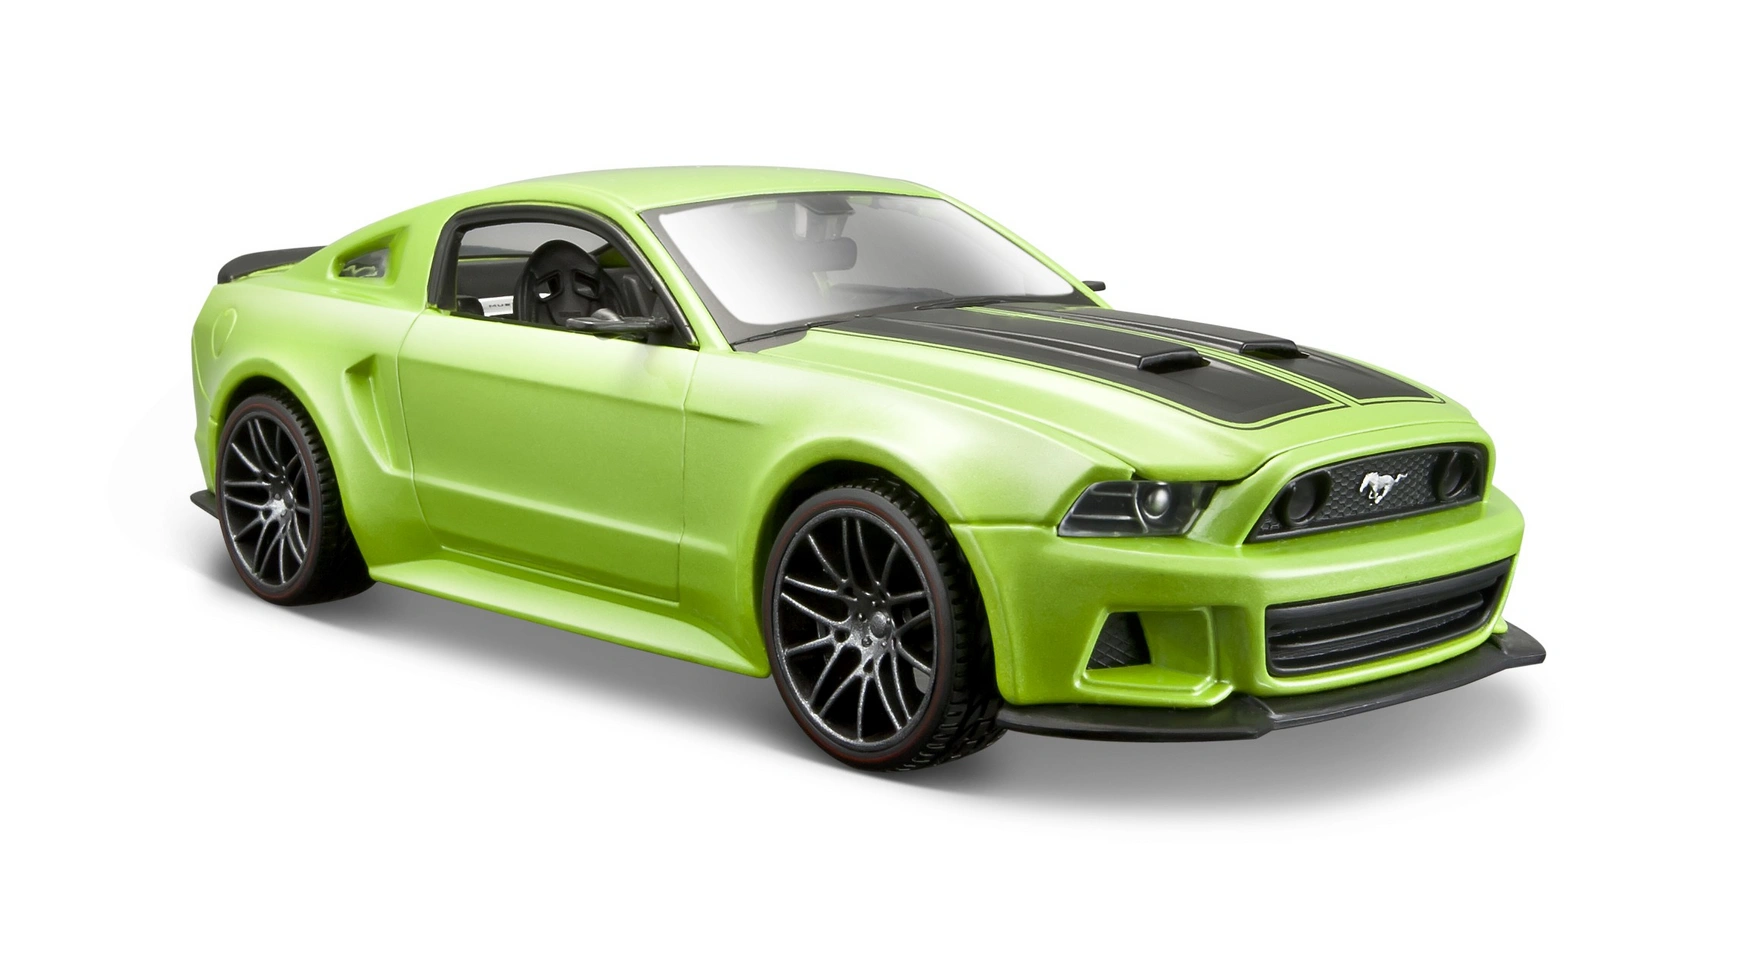 Maisto 1:24 Ford Mustang Street Racer 14 maisto 1 24 modified 1970 ford mustang boss 302 simulation alloy car model collection gift toy